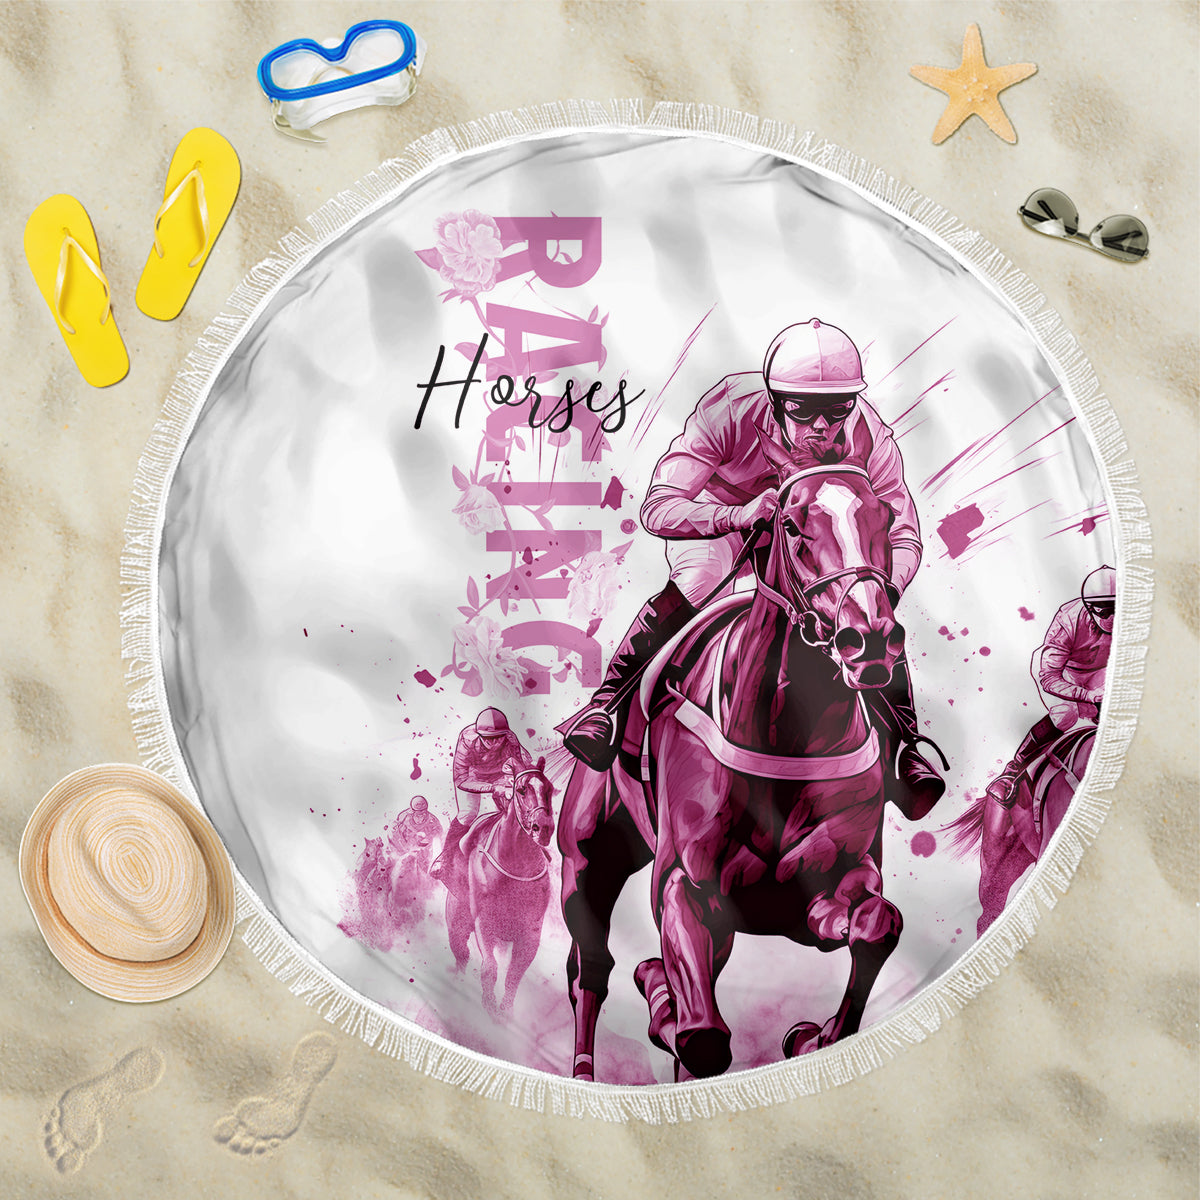 Kentucky Horses Racing Beach Blanket Jockey Drawing Style Pink Out Color